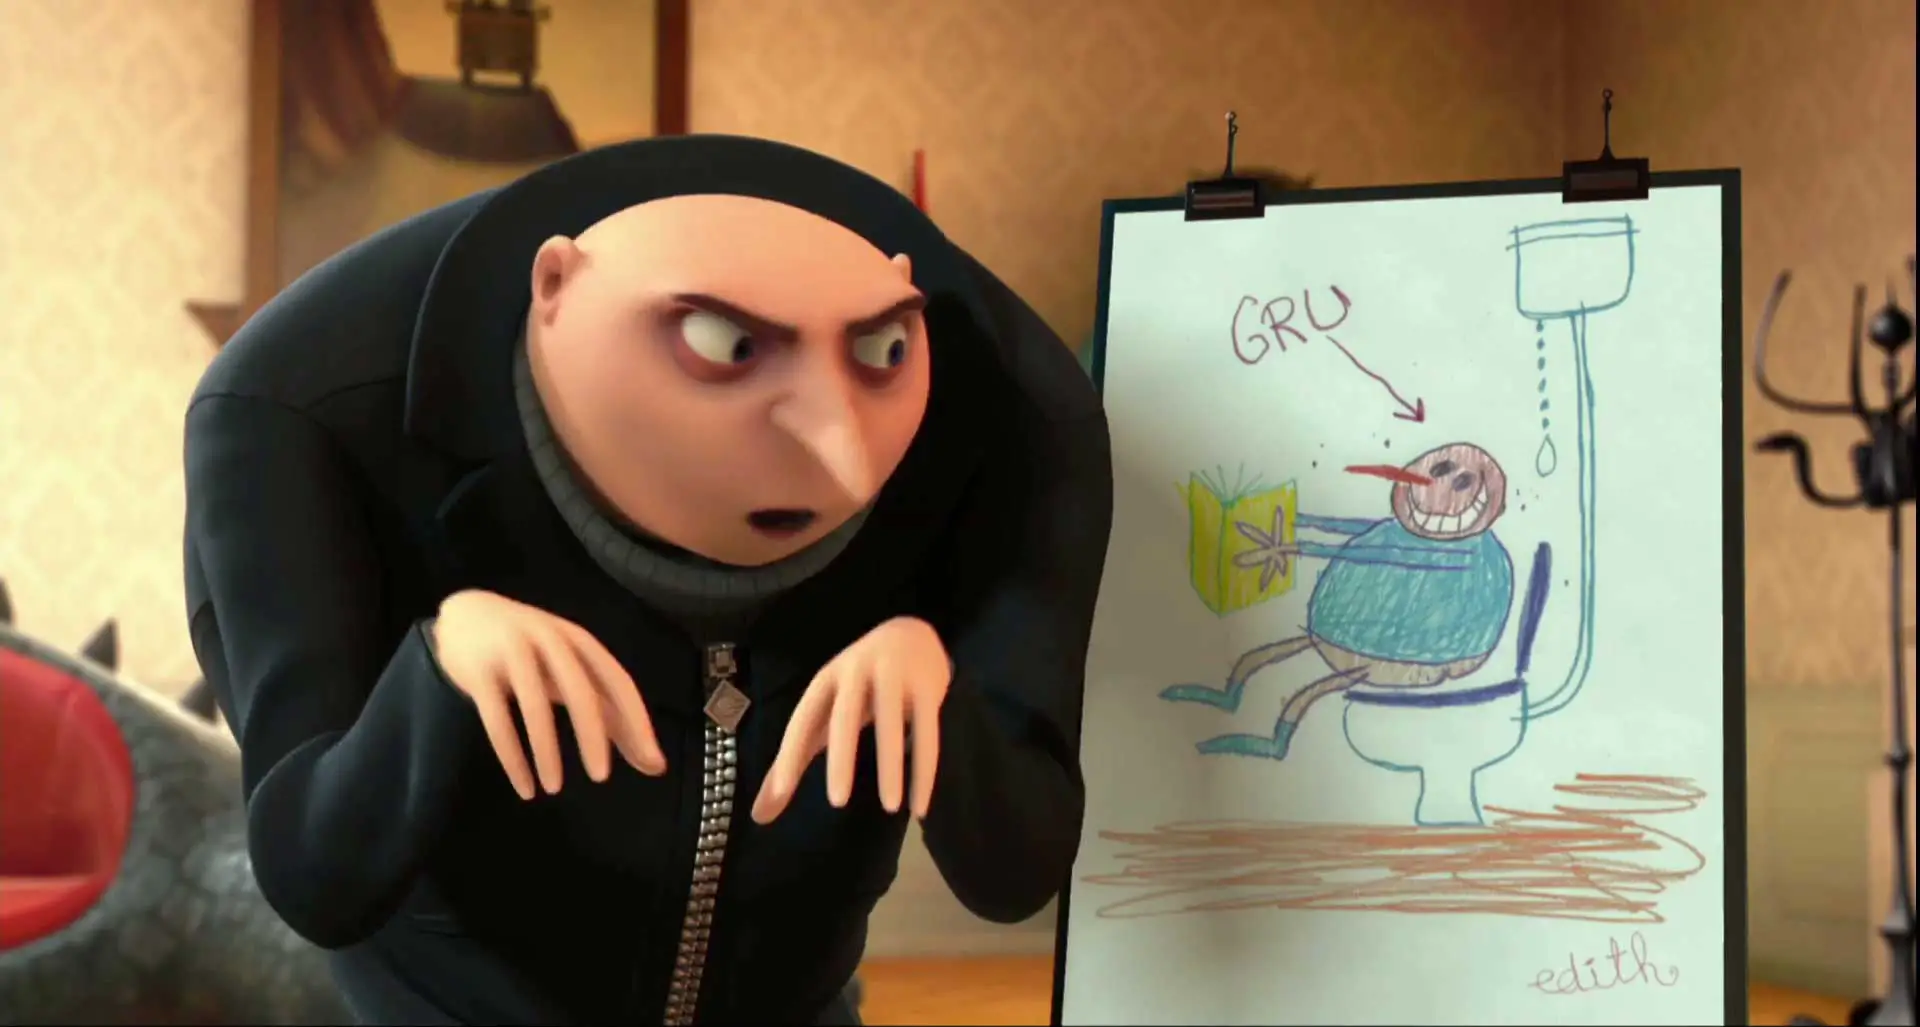 Download it now to see how Gru wanted to steal the... 